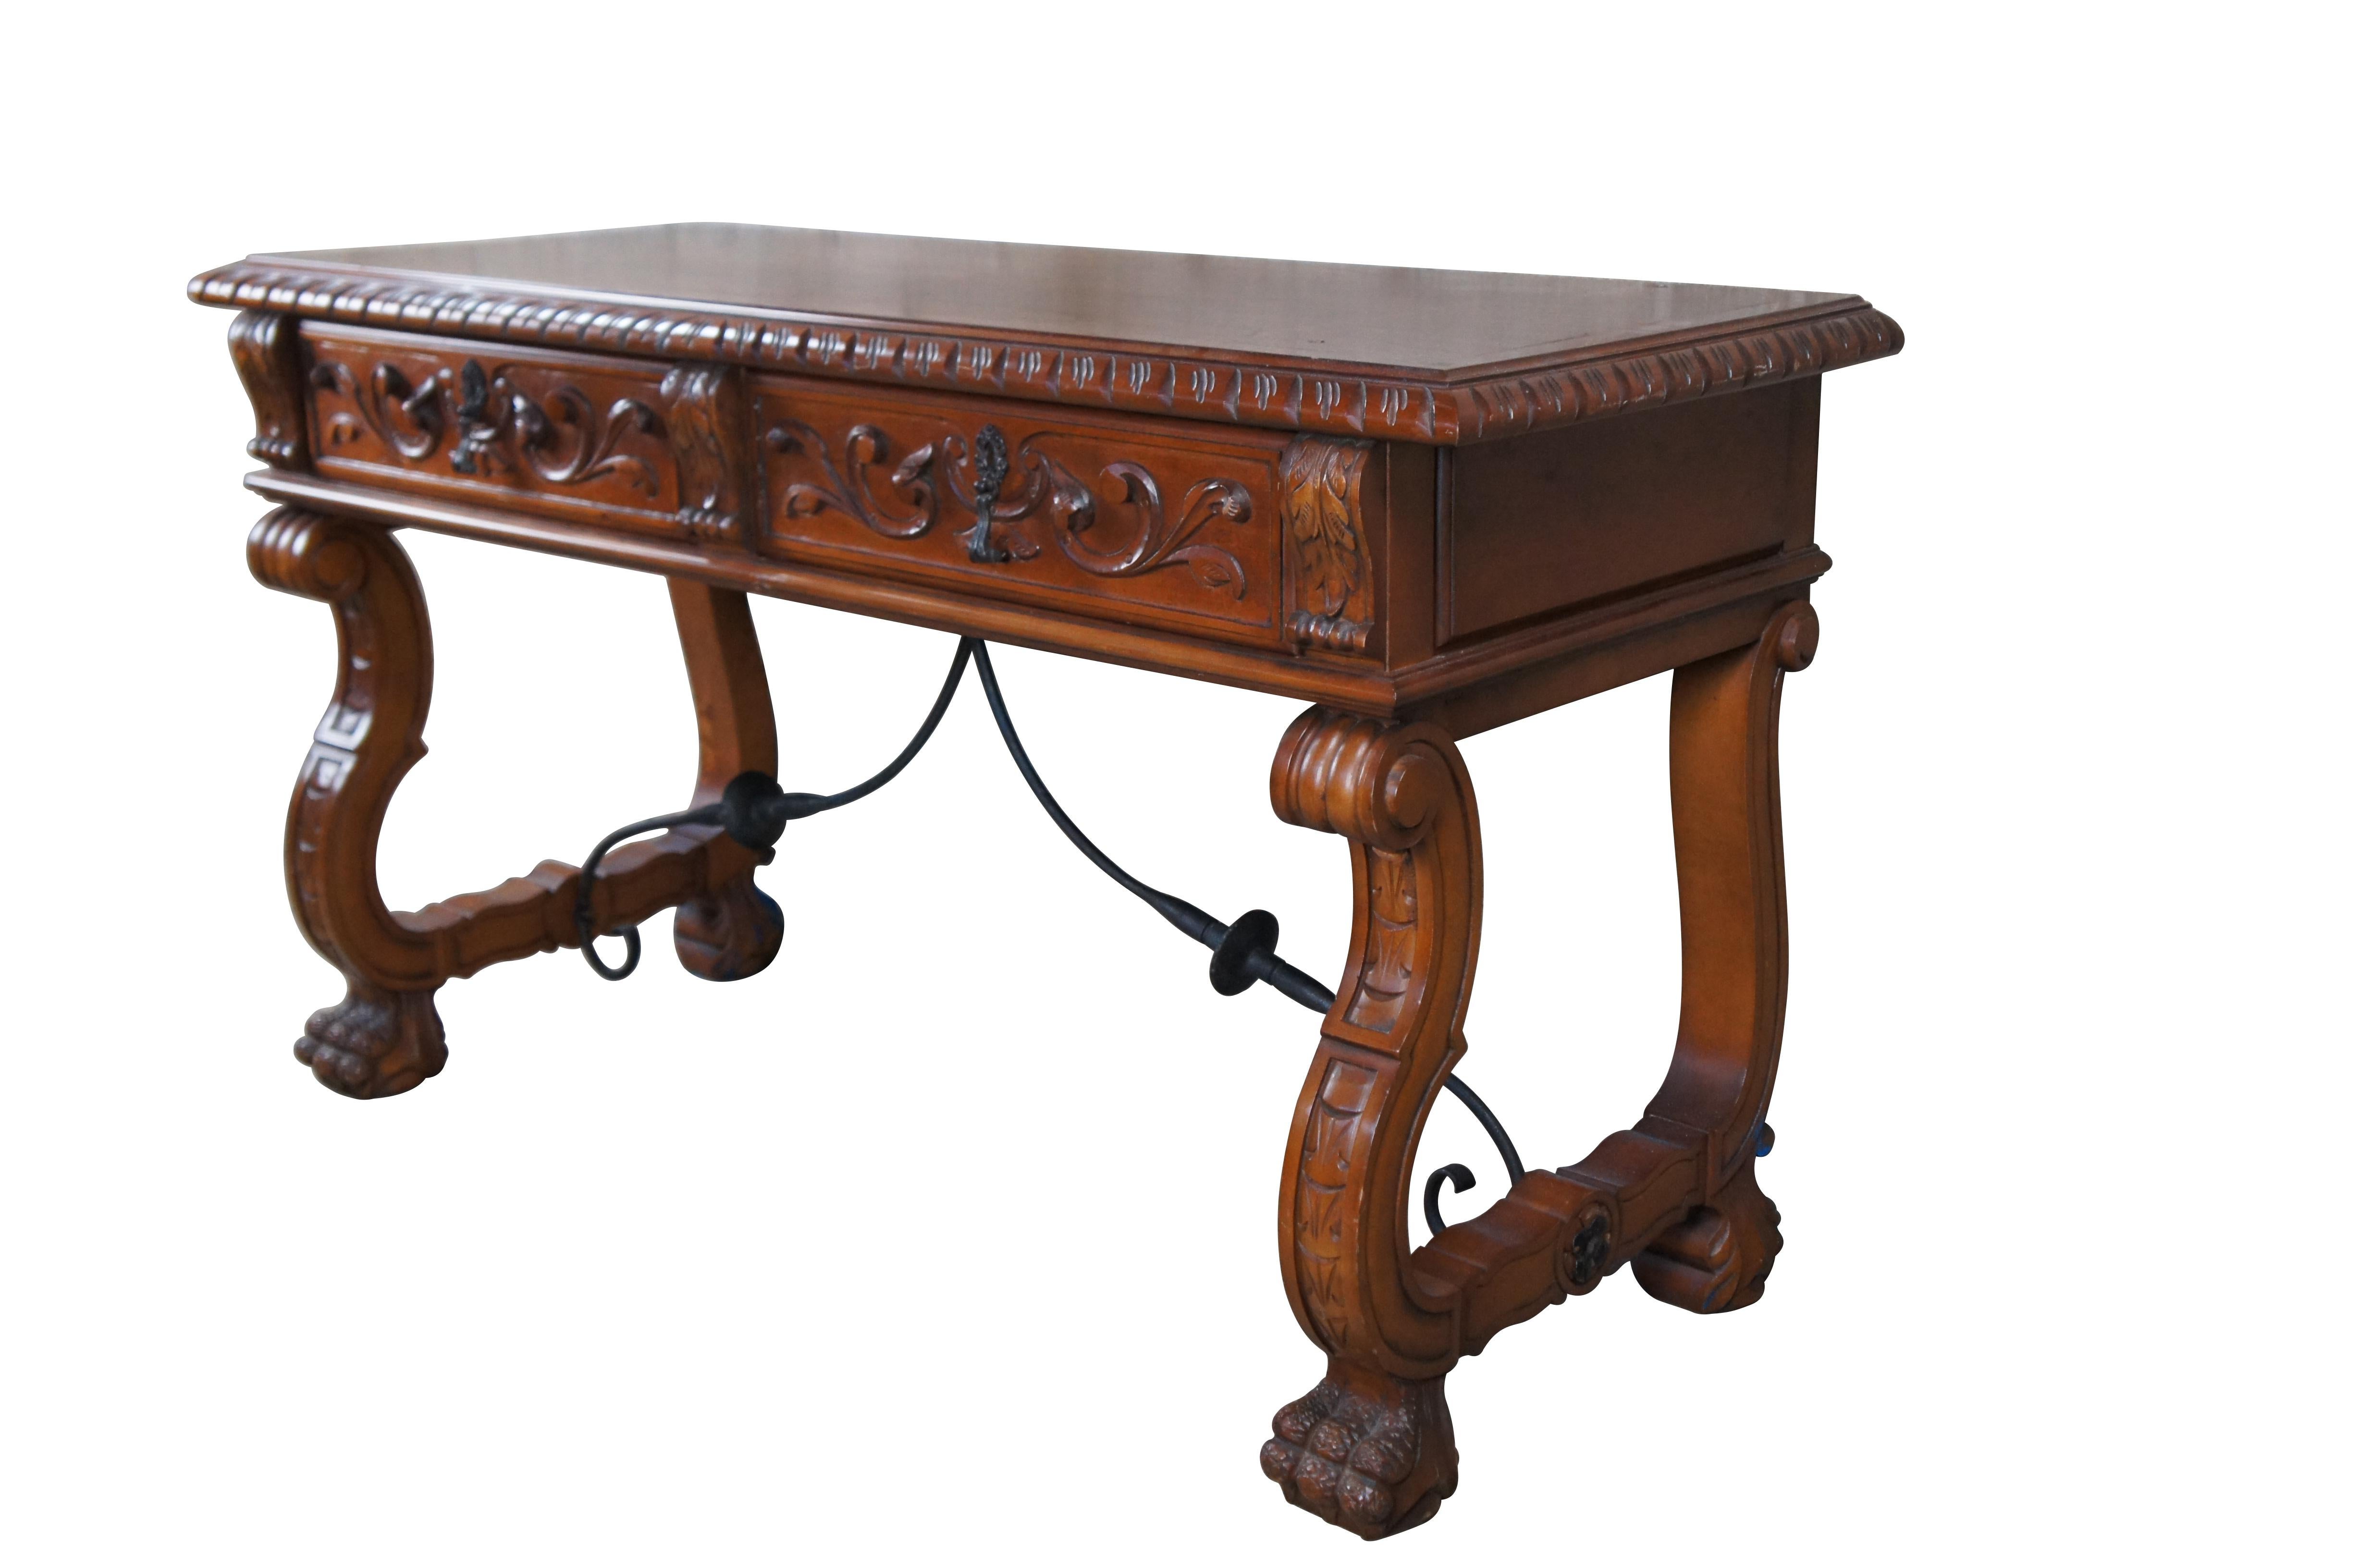 Spanish Colonial Jesus Ballester Marco Spanish Revival Mahogany Sideboard Library Console Desk For Sale